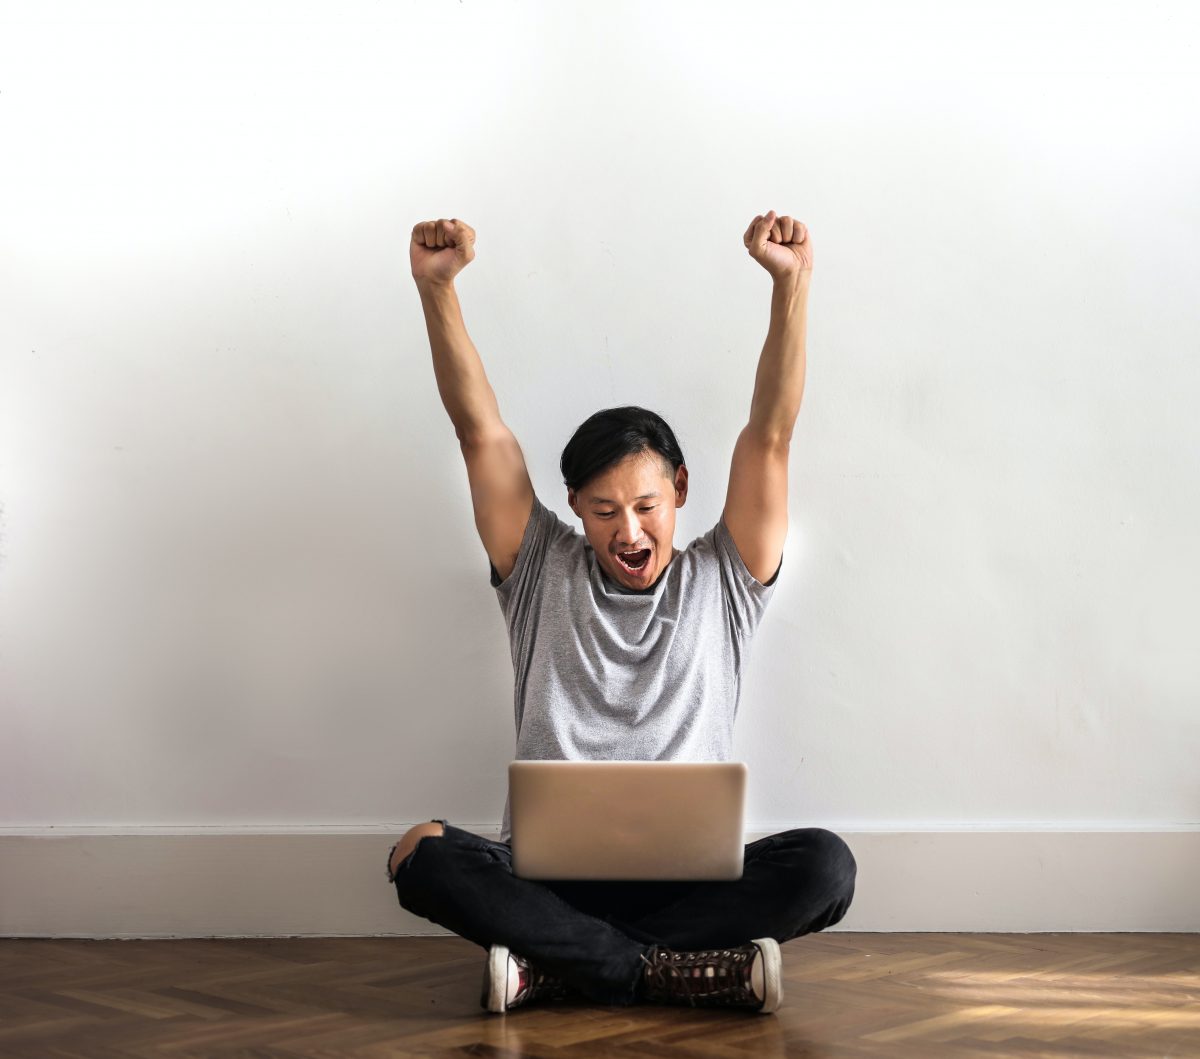 A young man with black hair and light brown skin raises his hands in triumph over his laptop.